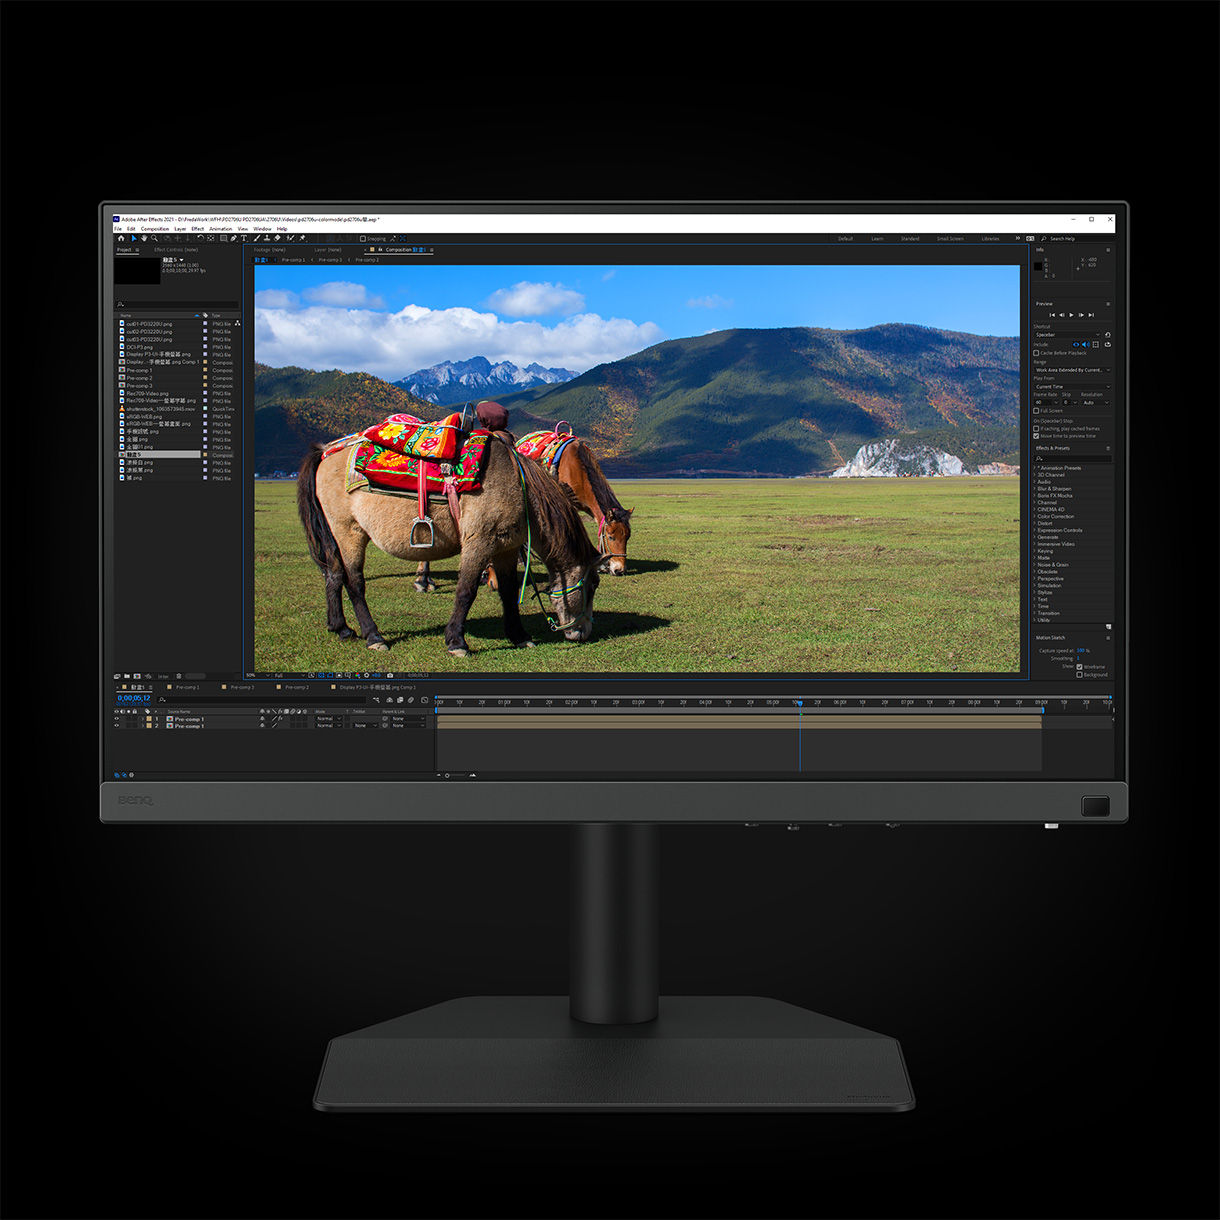 Equipped with P3 Color Space, BenQ SW242Q delivers accurate colors to videos with P3 color space for your video projects.